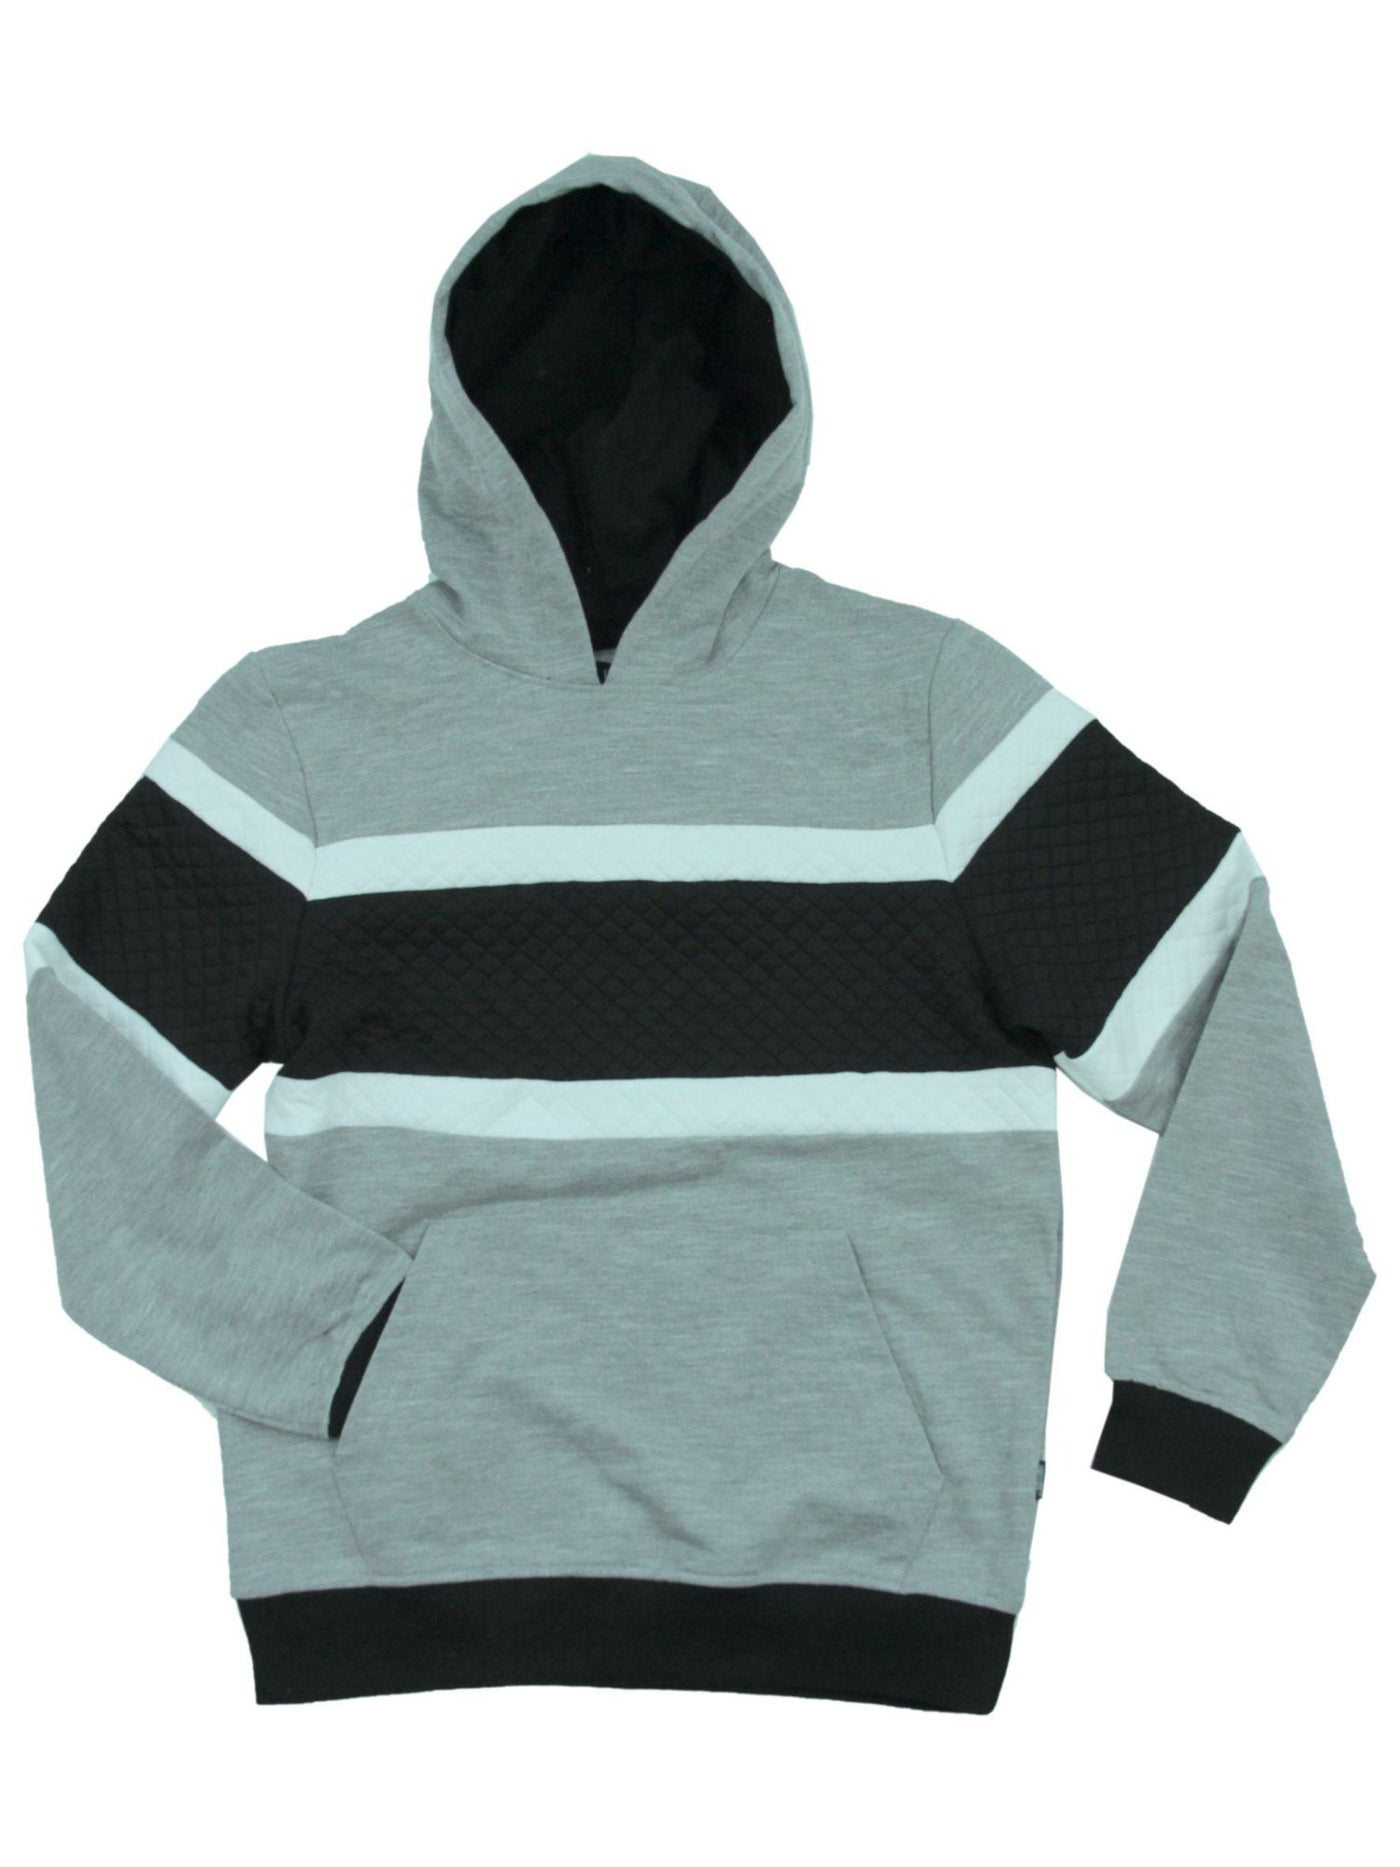 UNIVIBE Mens Gray Color Block Long Sleeve Classic Fit Hoodie XL